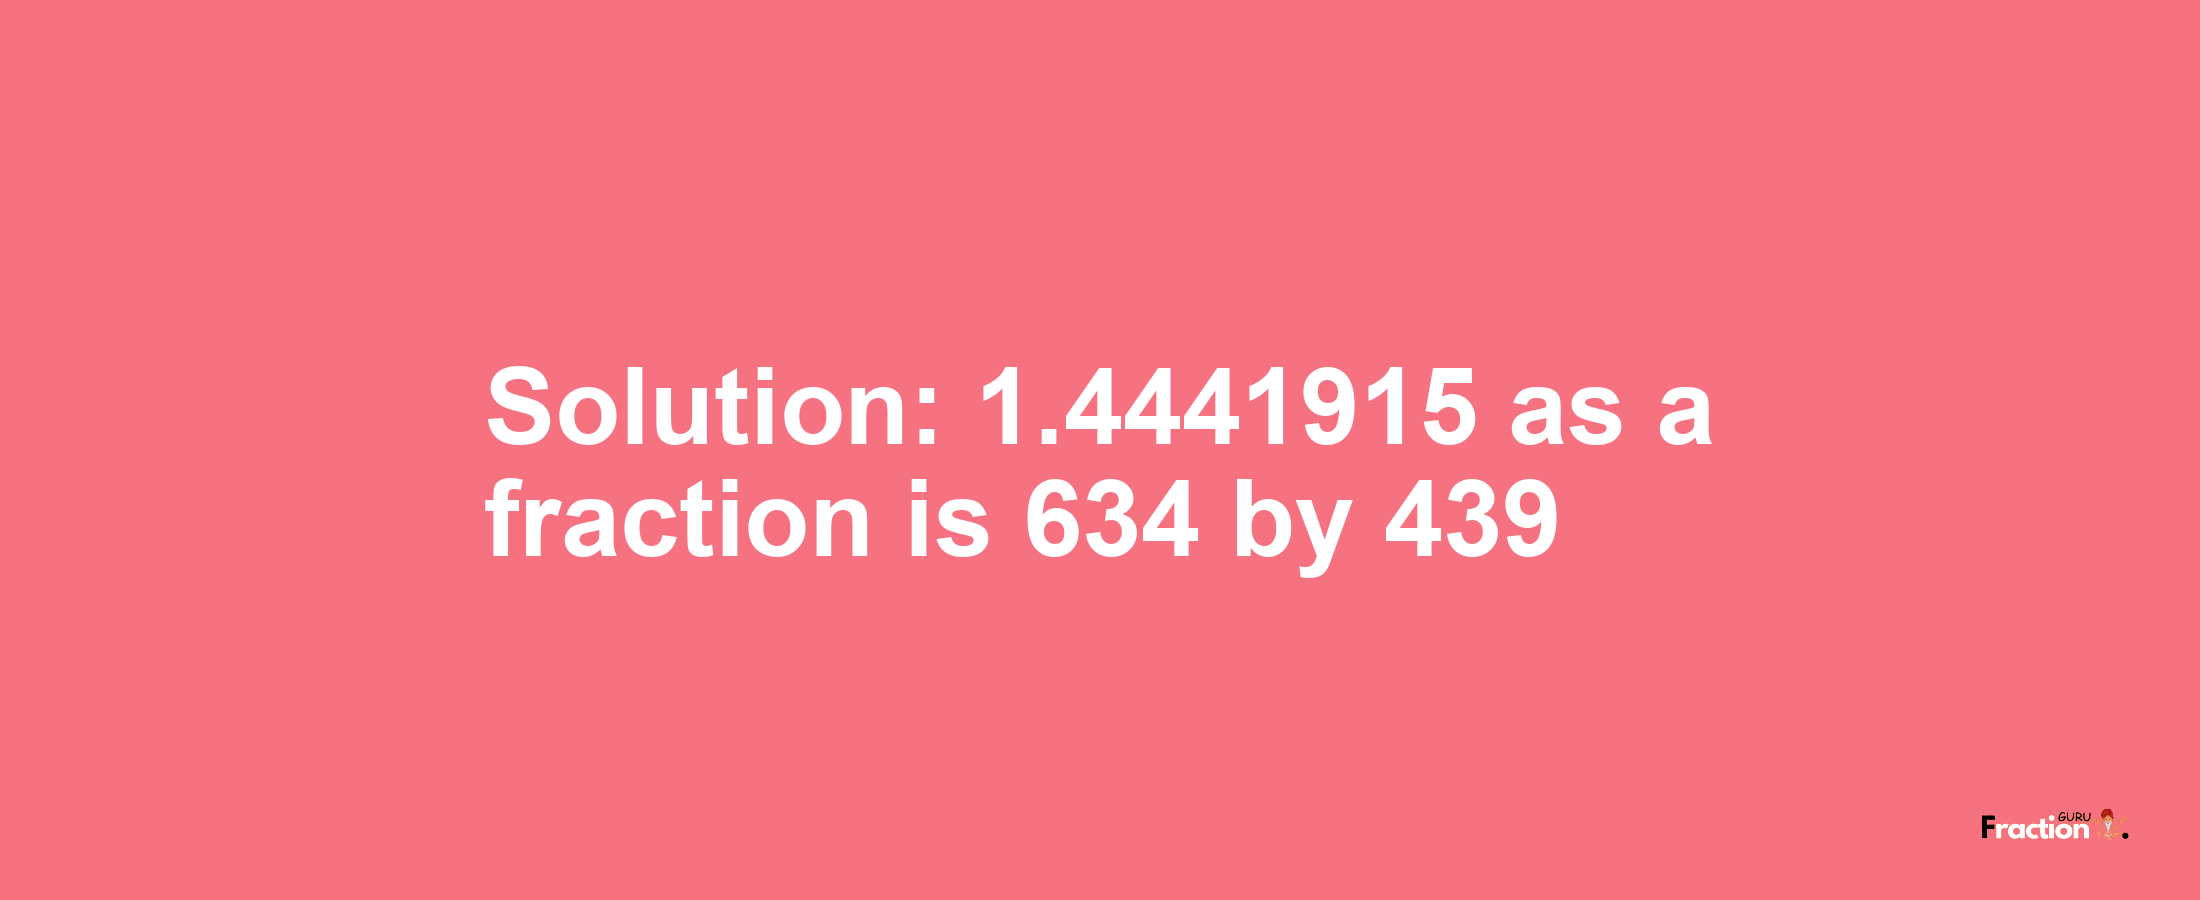 Solution:1.4441915 as a fraction is 634/439